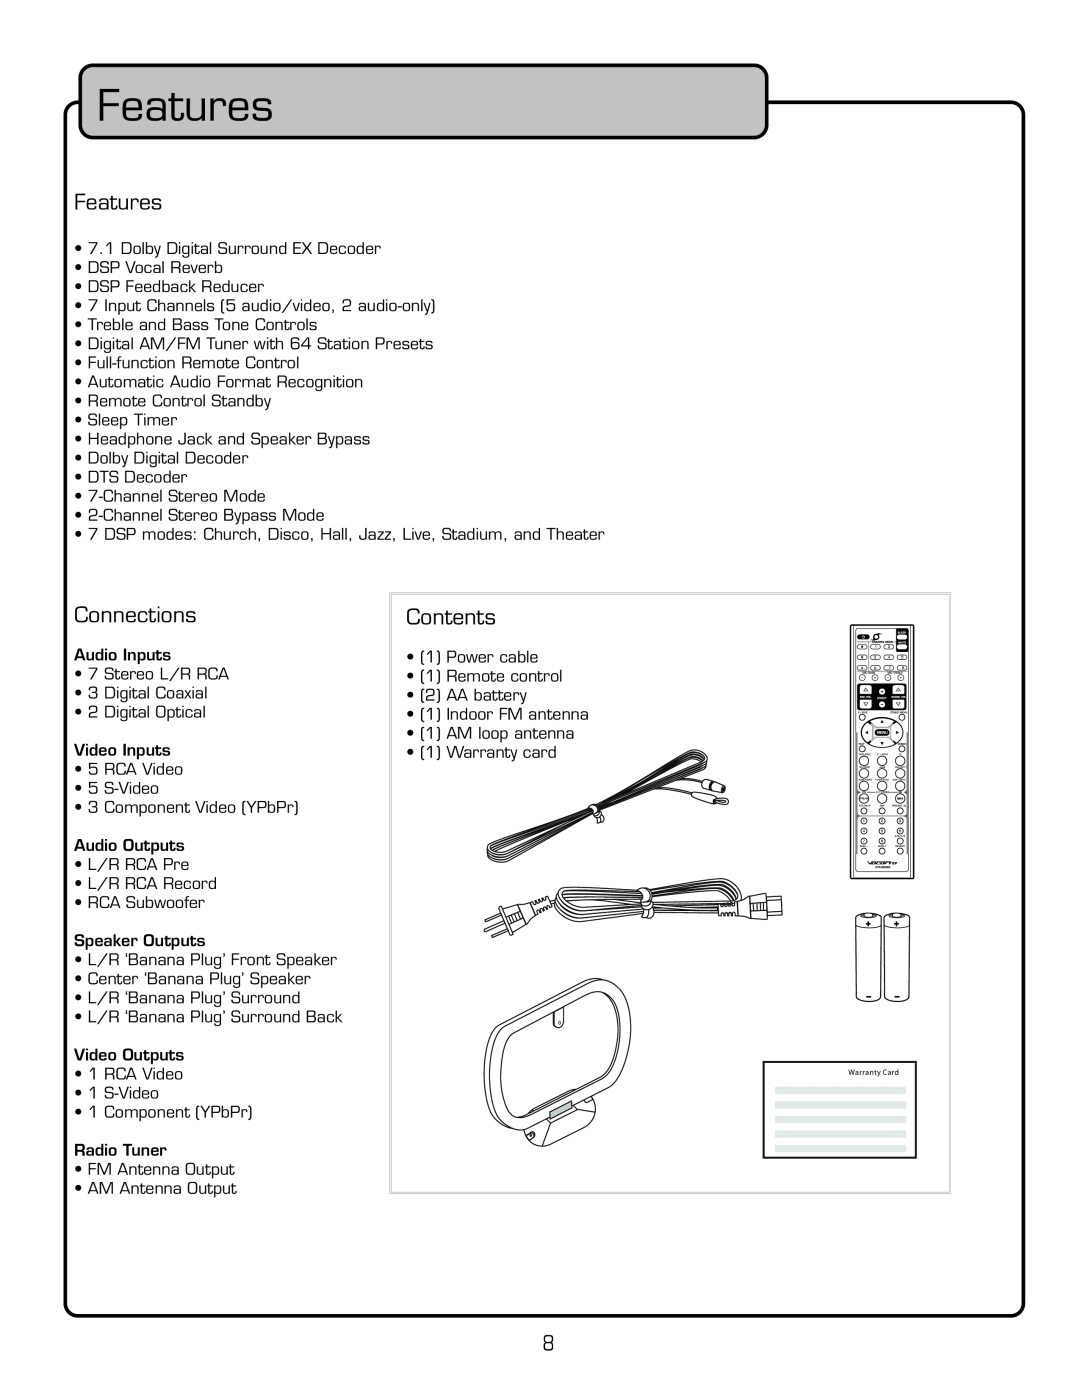 VocoPro DTX-9909K owner manual Features, Connections, Contents 